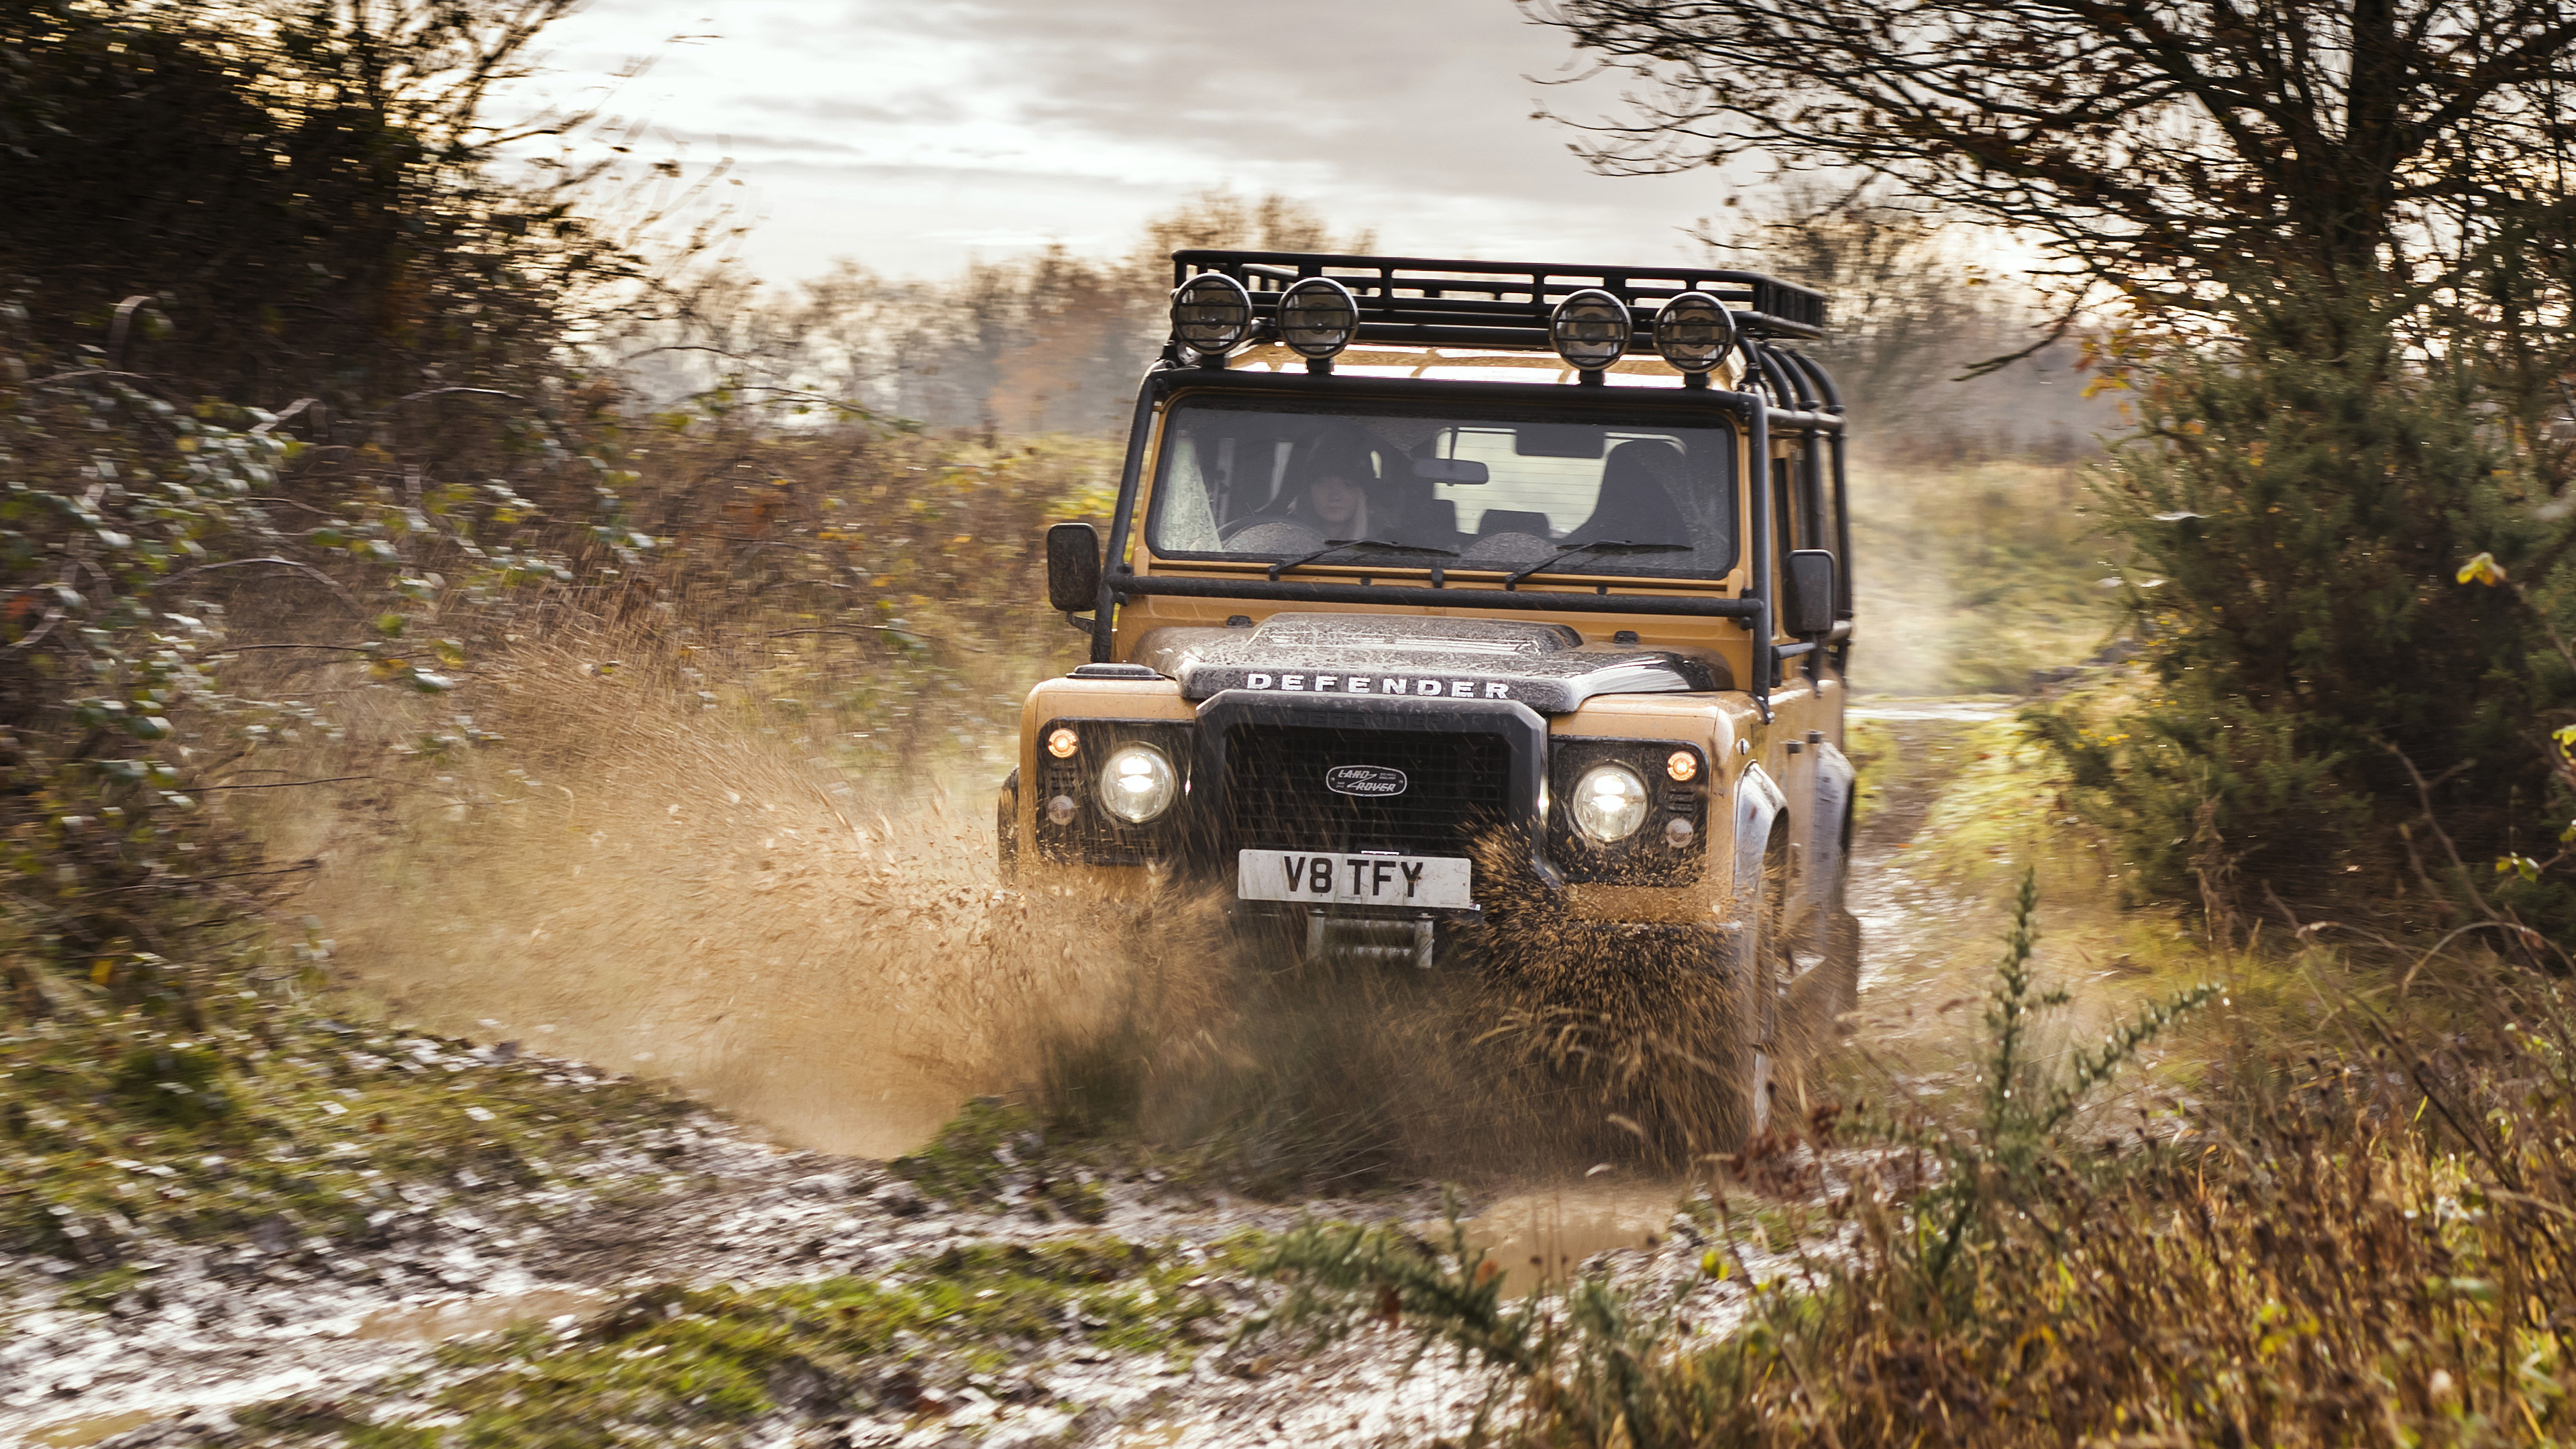 Off-road Driving: Land Rover Defender, Mudding, Off-roading through an area of wet mud or clay. 3840x2160 4K Wallpaper.